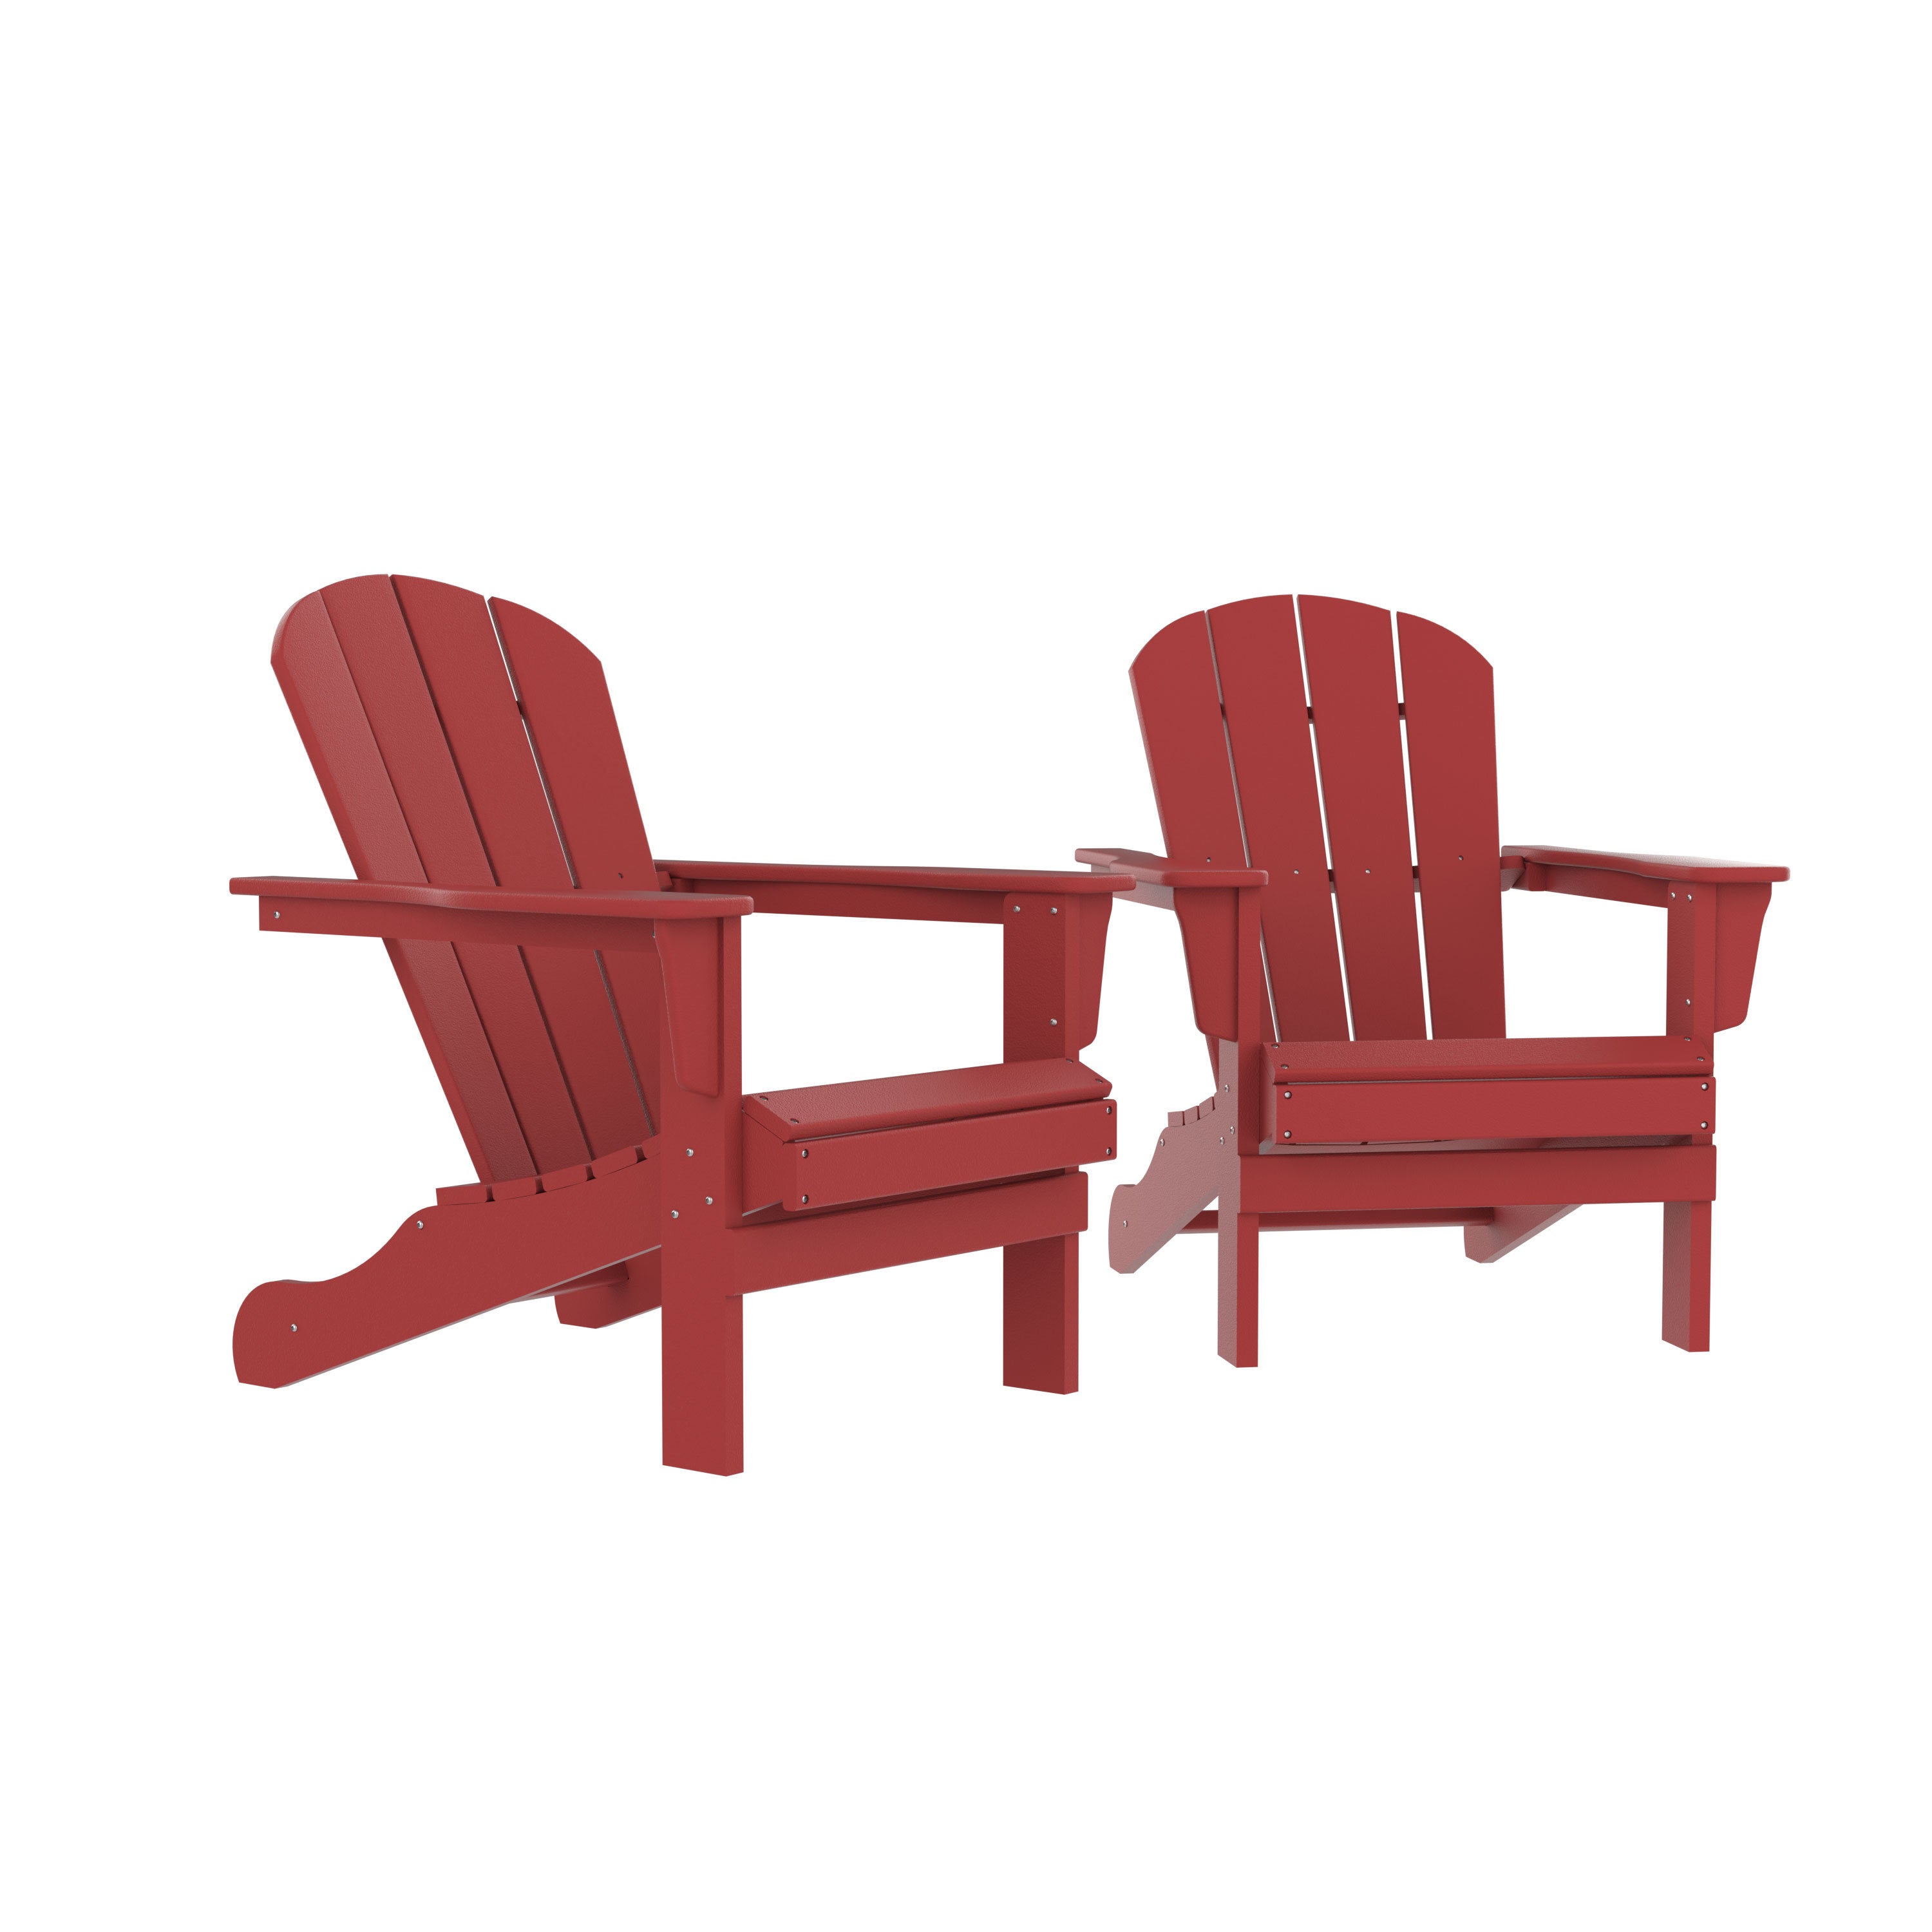 HDPE Adirondack Chair Terrace Outdoor Chair Set of 2 (Red)